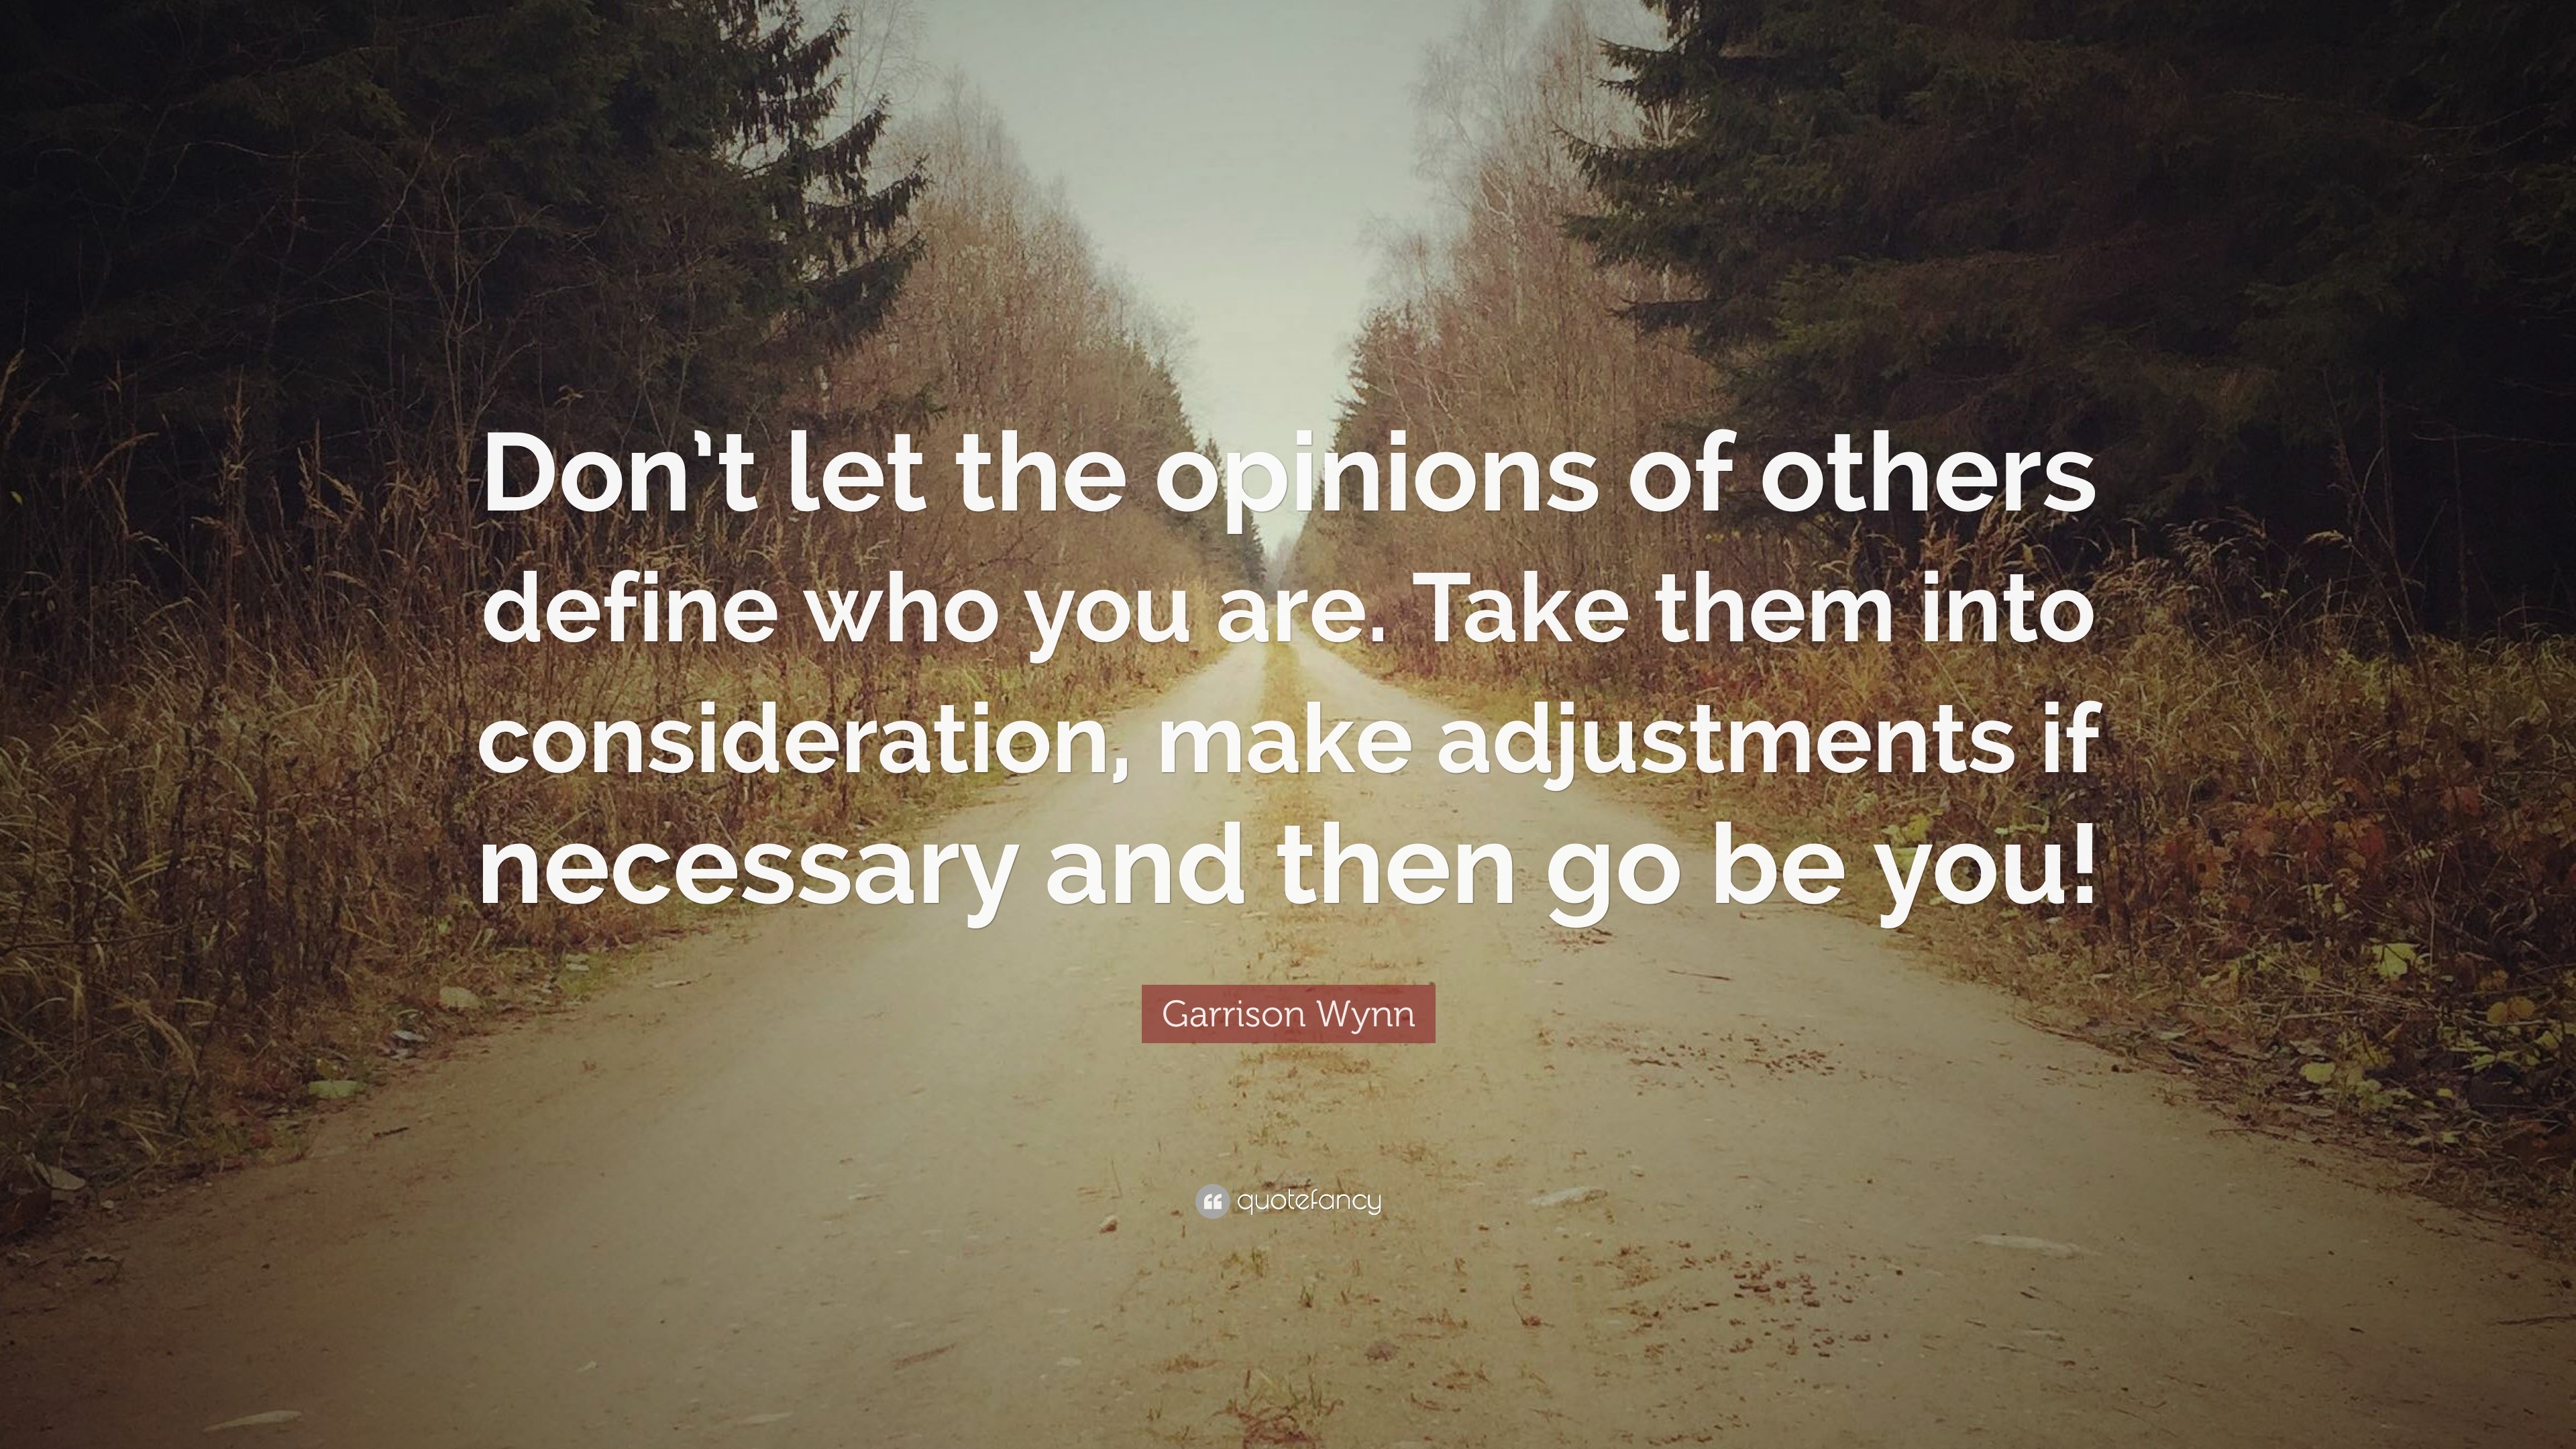 Garrison Wynn Quote: “Don’t let the opinions of others define who you